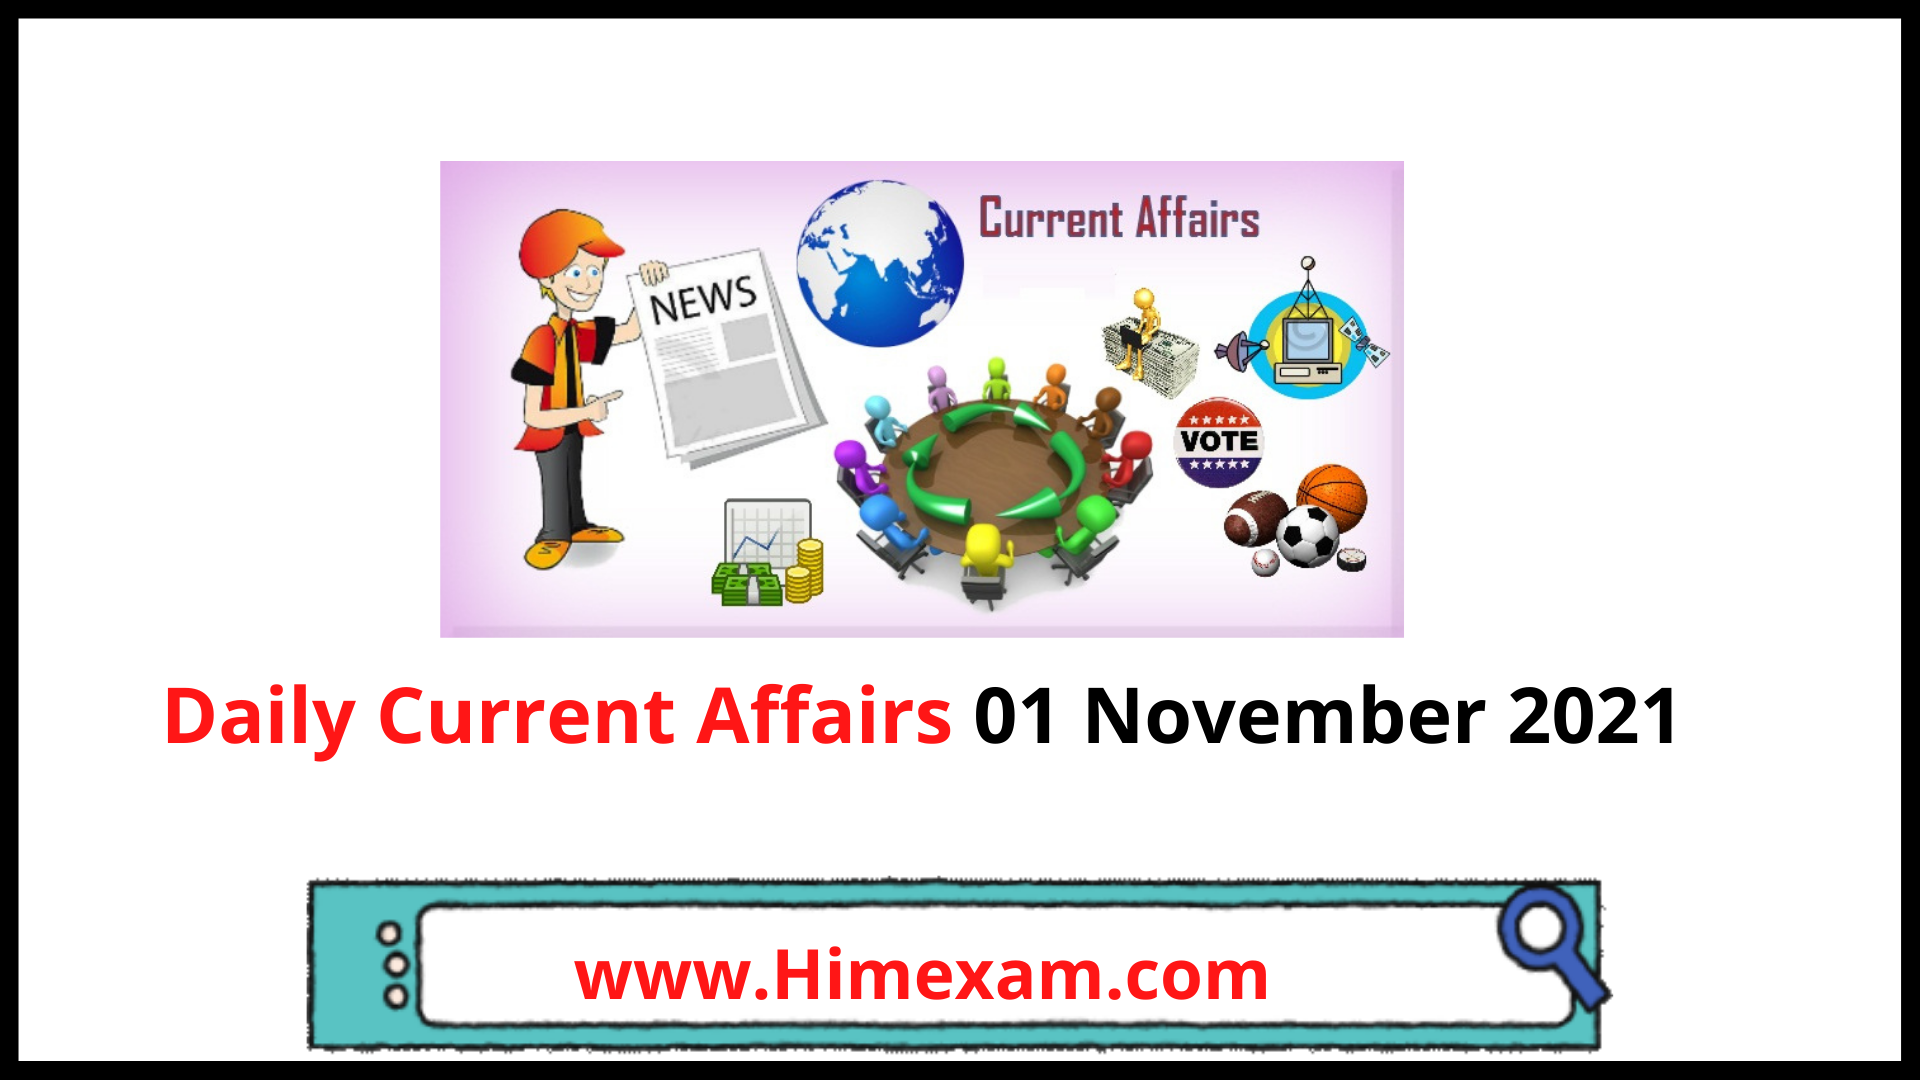 Daily Current Affairs 01 November 2021